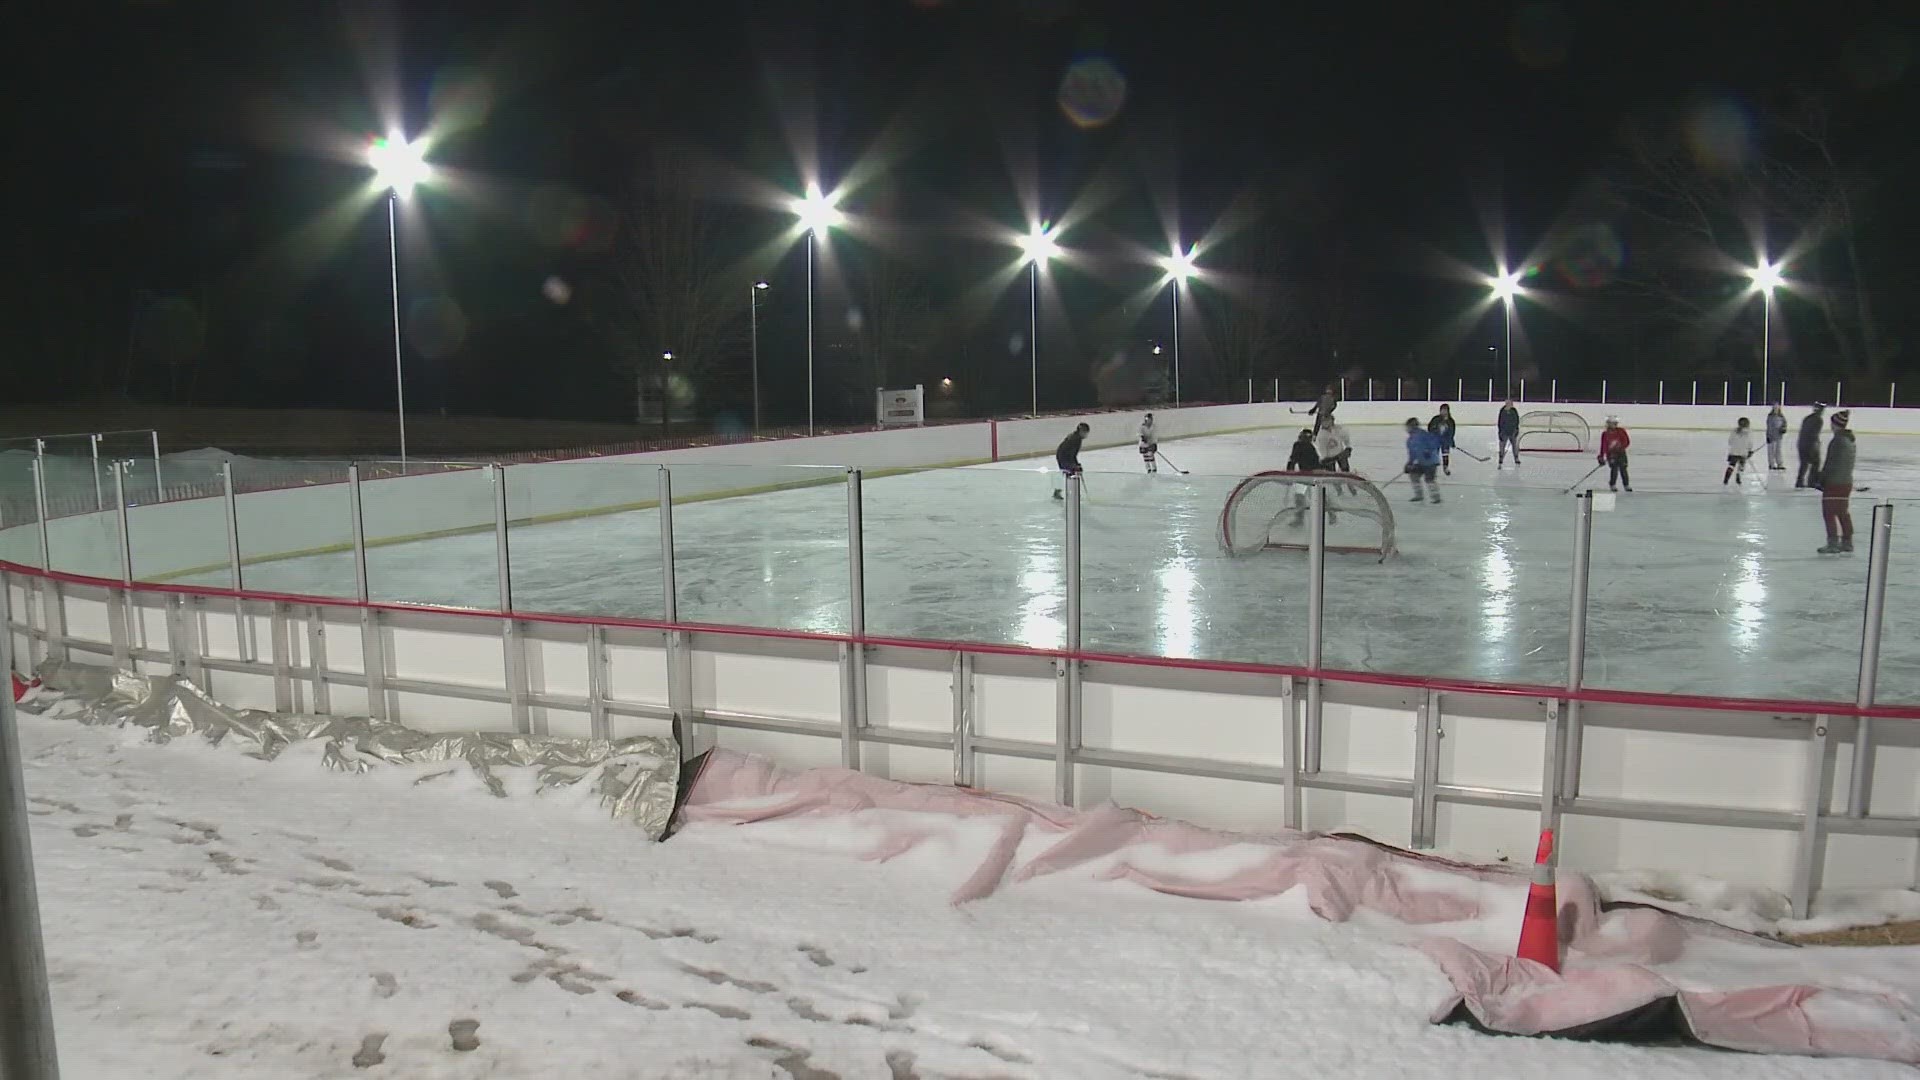 The next step is to put a permanent roof and slab, which would make it easier and more cost-effective for future years to set up the rink for all to use.